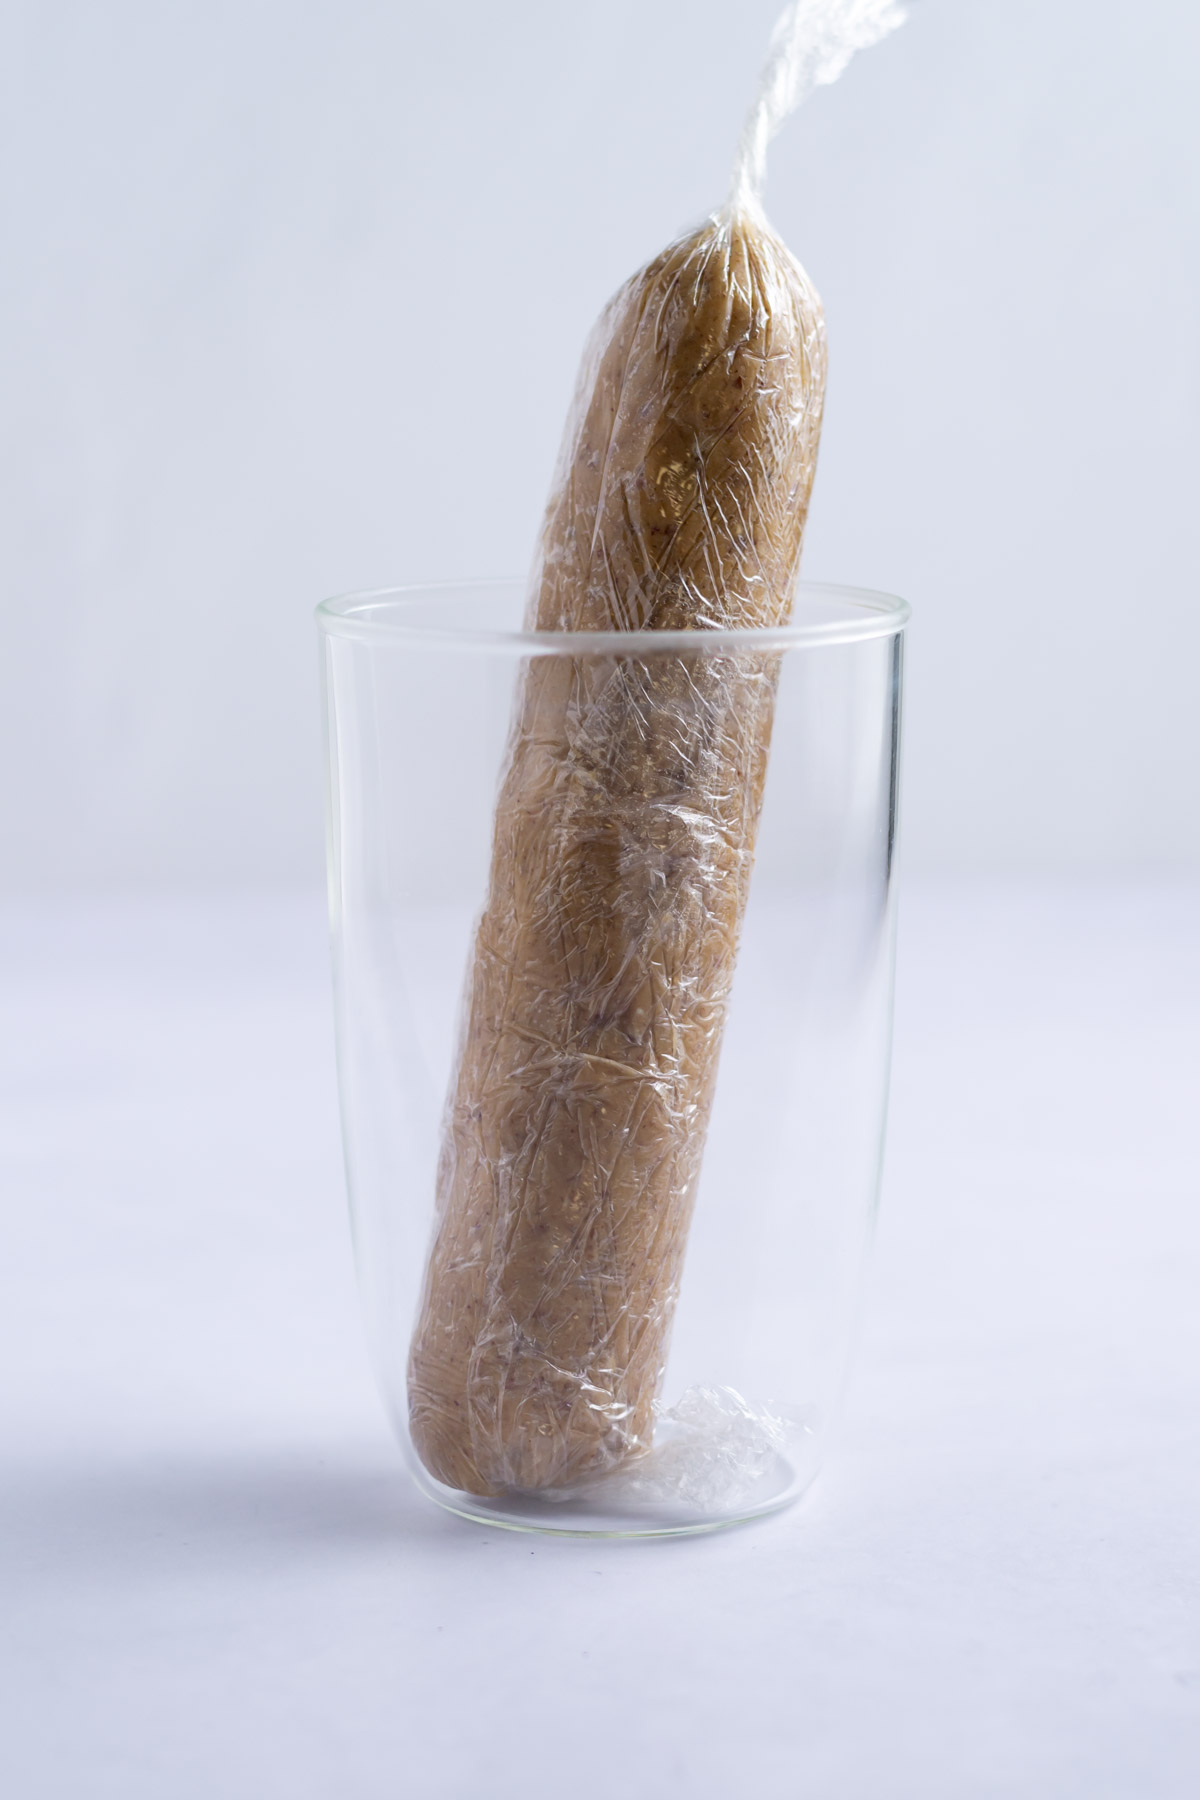 pecan cracker dough wrapped in plastic wrap standing in a tall glass